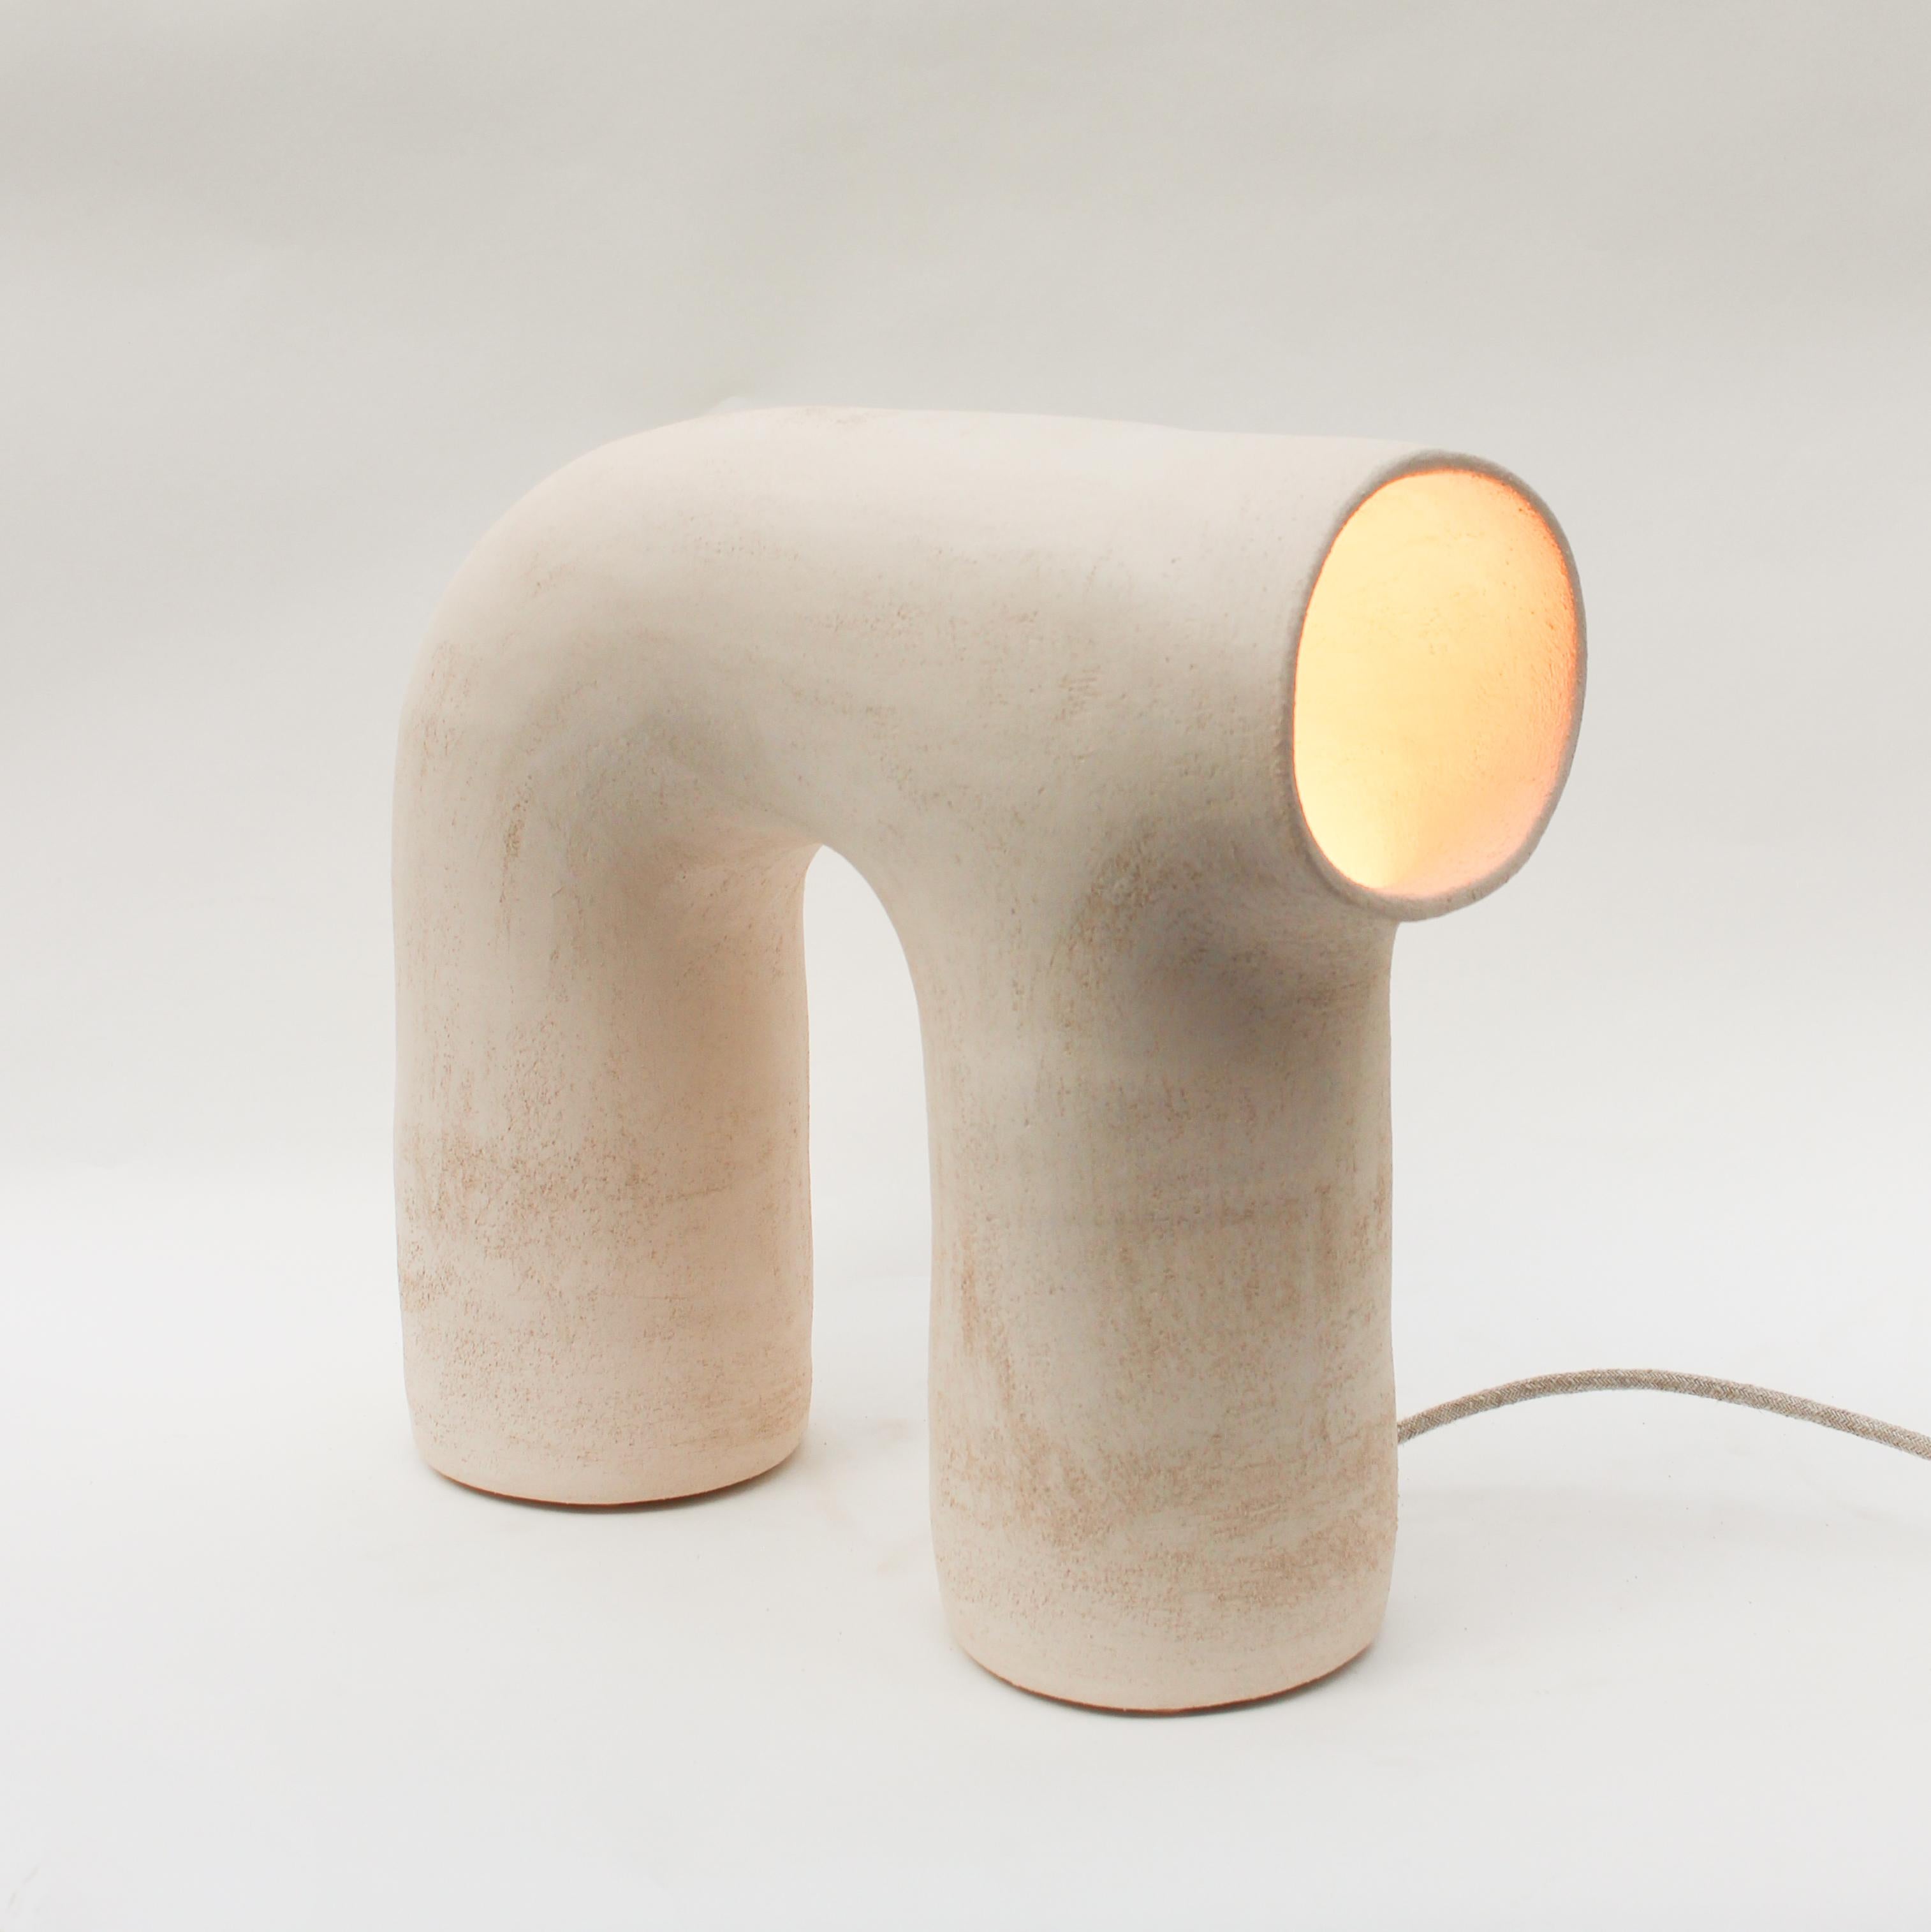 Arche #3 white stoneware lamp by Elisa Uberti
Dimensions: D55 x W23 x H55 cm
Materials: Stoneware
Also available in: white/pinck or black Stoneware.

All our lamps can be wired according to each country. If sold to the USA it will be wired for